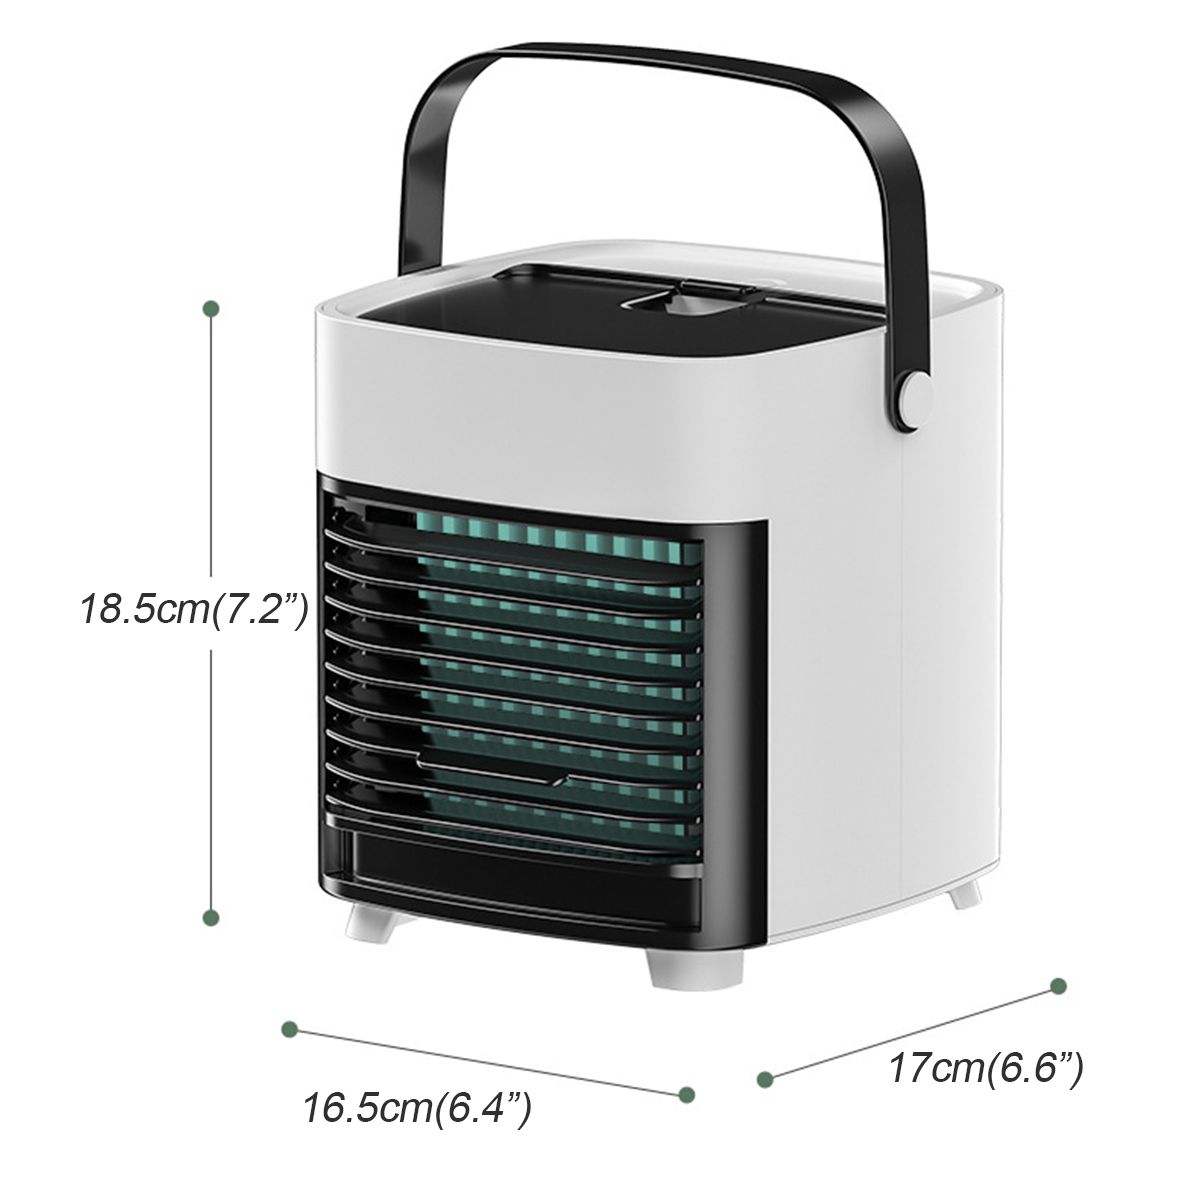 Ultra-Quiet-Portable-USB-Air-Conditioning-Fan-Bedroom-Living-Room-Office-Travel-Water-Cooling-Three--1710158